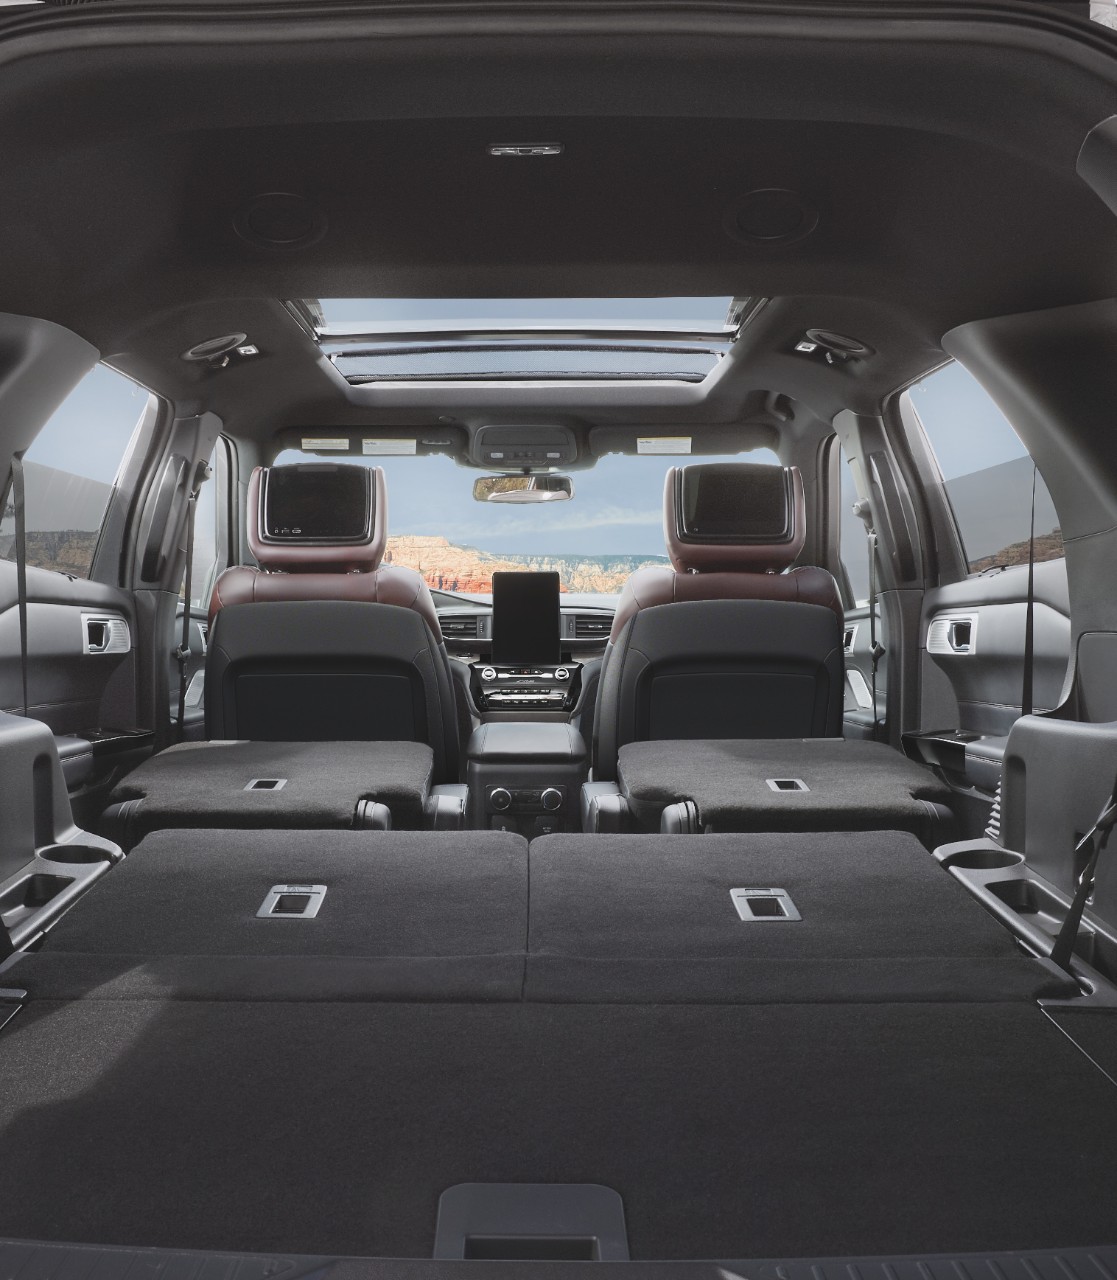 What's New With the 2021 Ford Explorer Interior